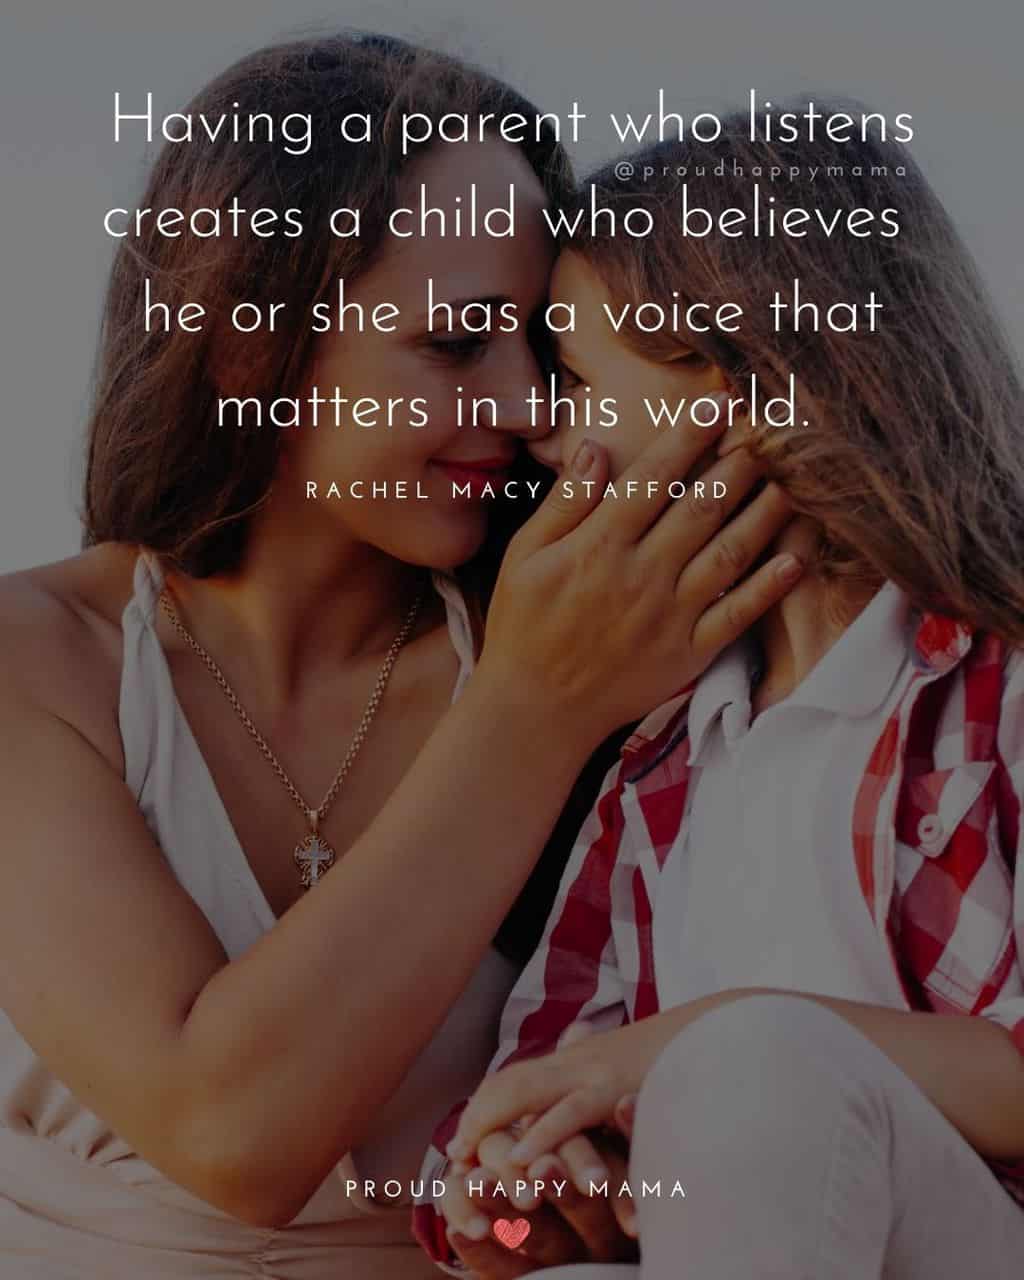 Parenting Quotes - Having a parent who listens creates a child who believes he or she has a voice that matters in this world.’ – Rachel